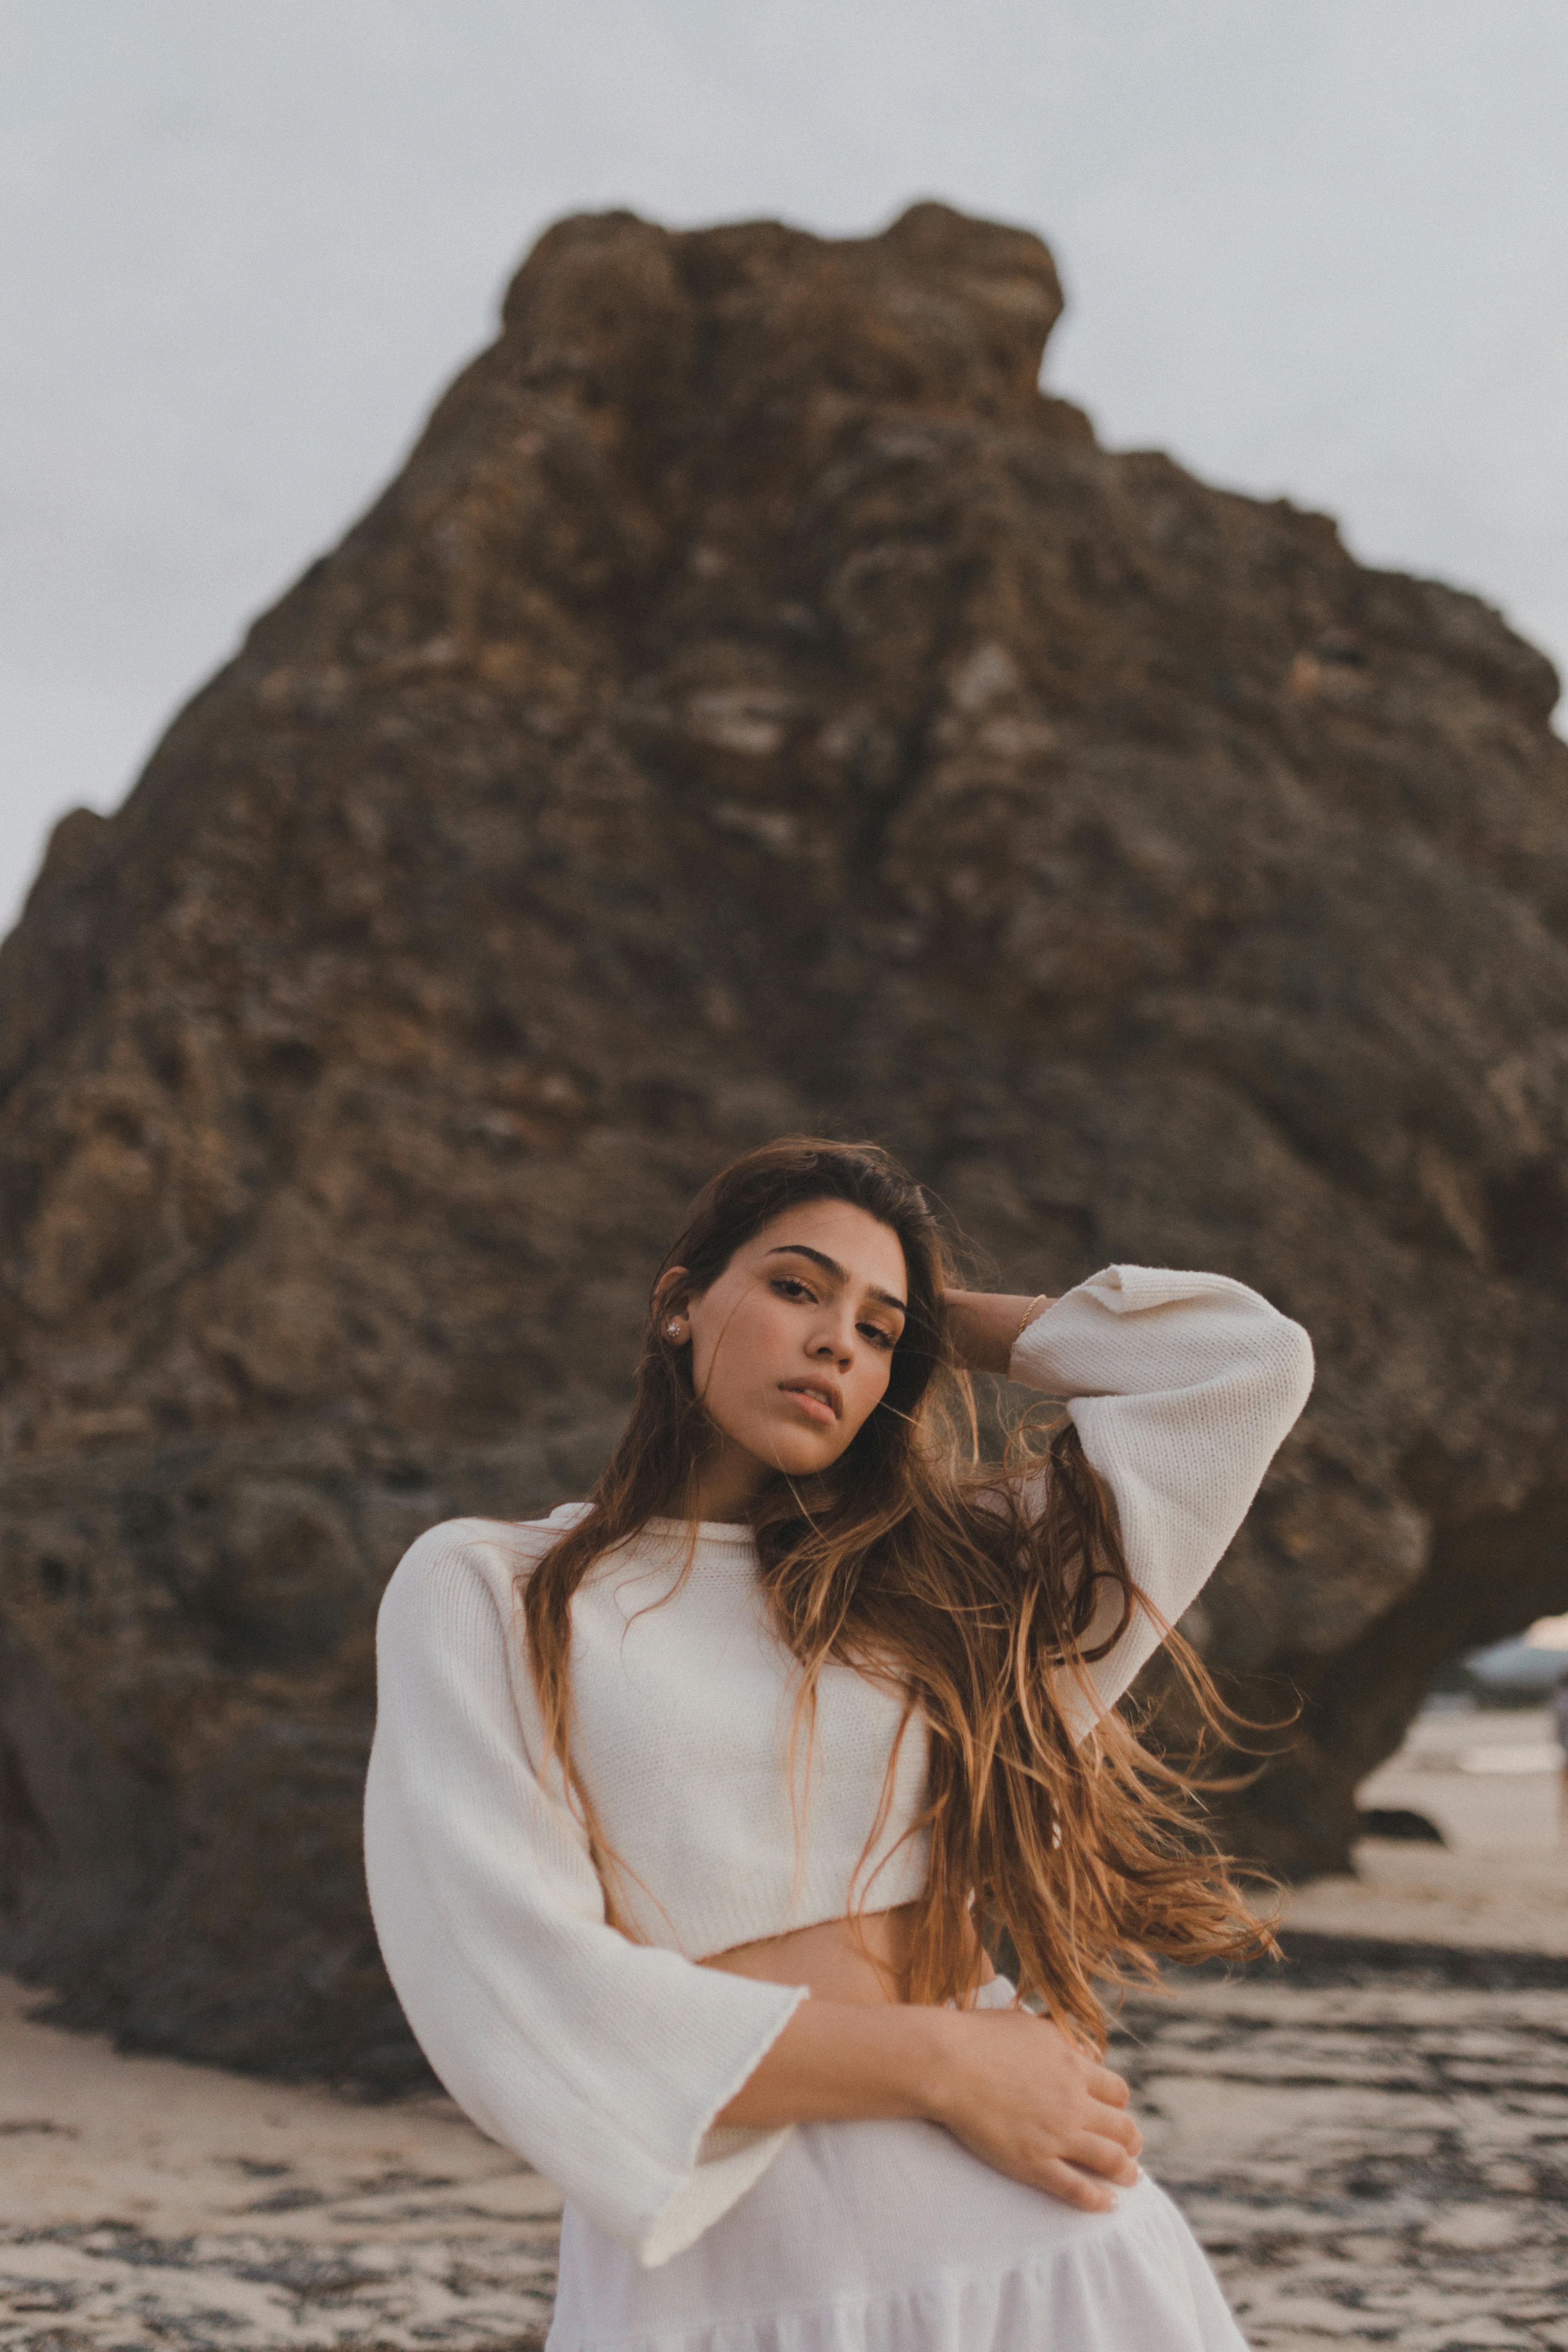 https://images.pexels.com/photos/15031717/pexels-photo-15031717/free-photo-of-photo-of-a-woman-standing-in-front-of-a-rock.jpeg